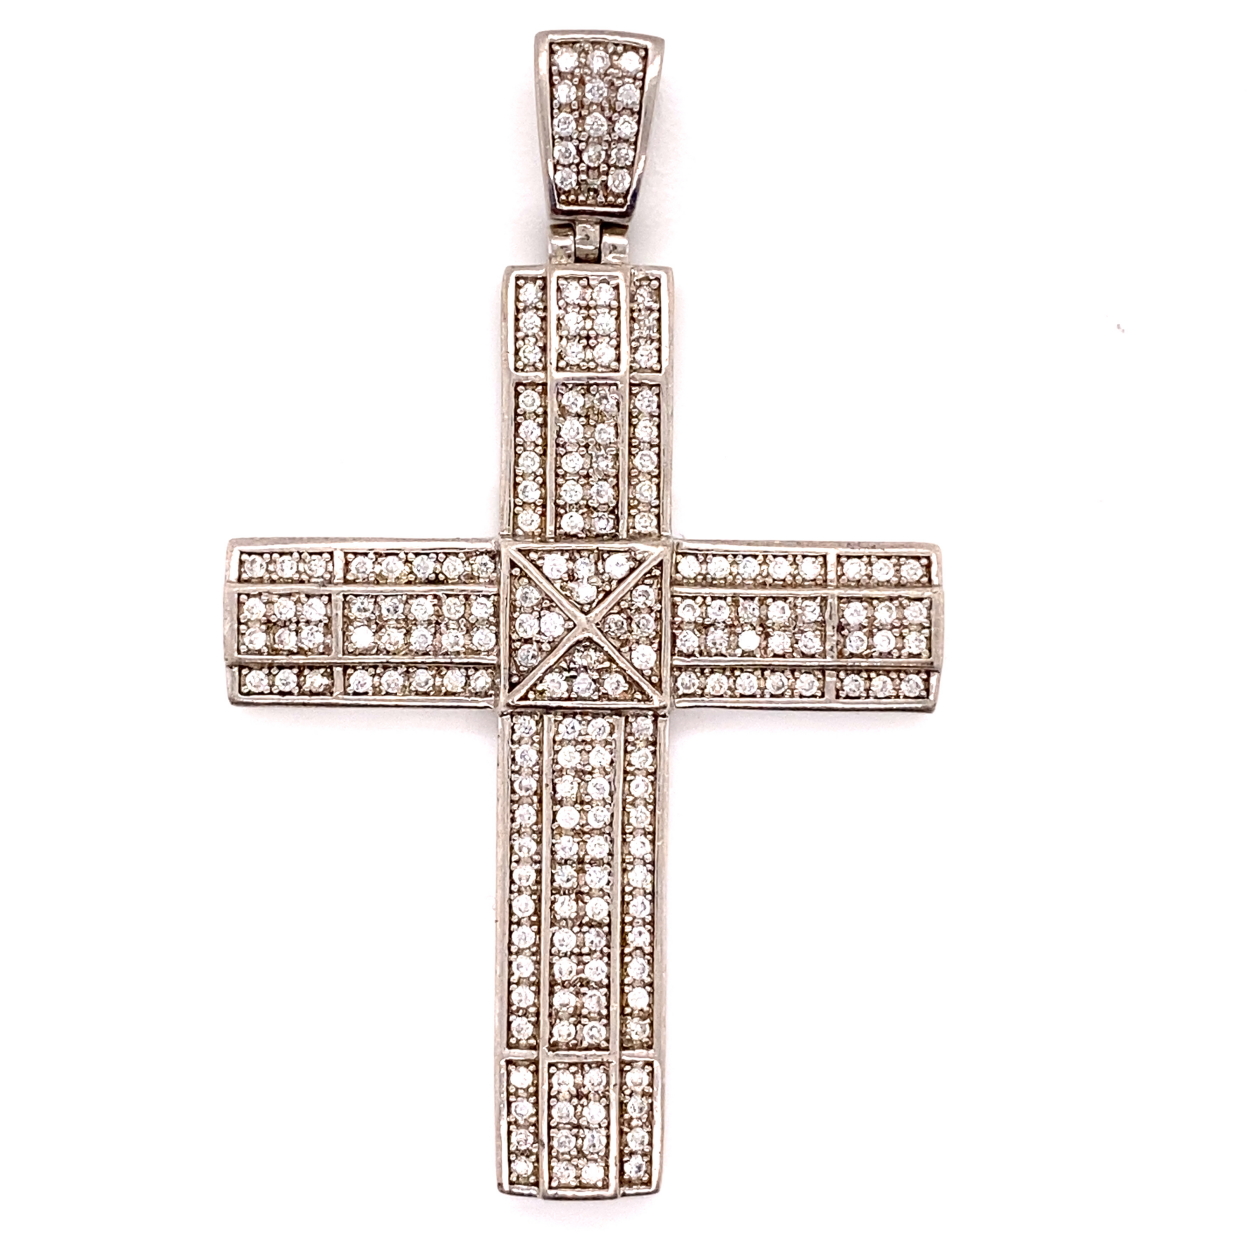 A SILVER AND MULTI CUBIC ZIRCONIA GRAIN SET LARGE CROSS PENDANT WITH ARTICULATED BALE. STAMPED 925